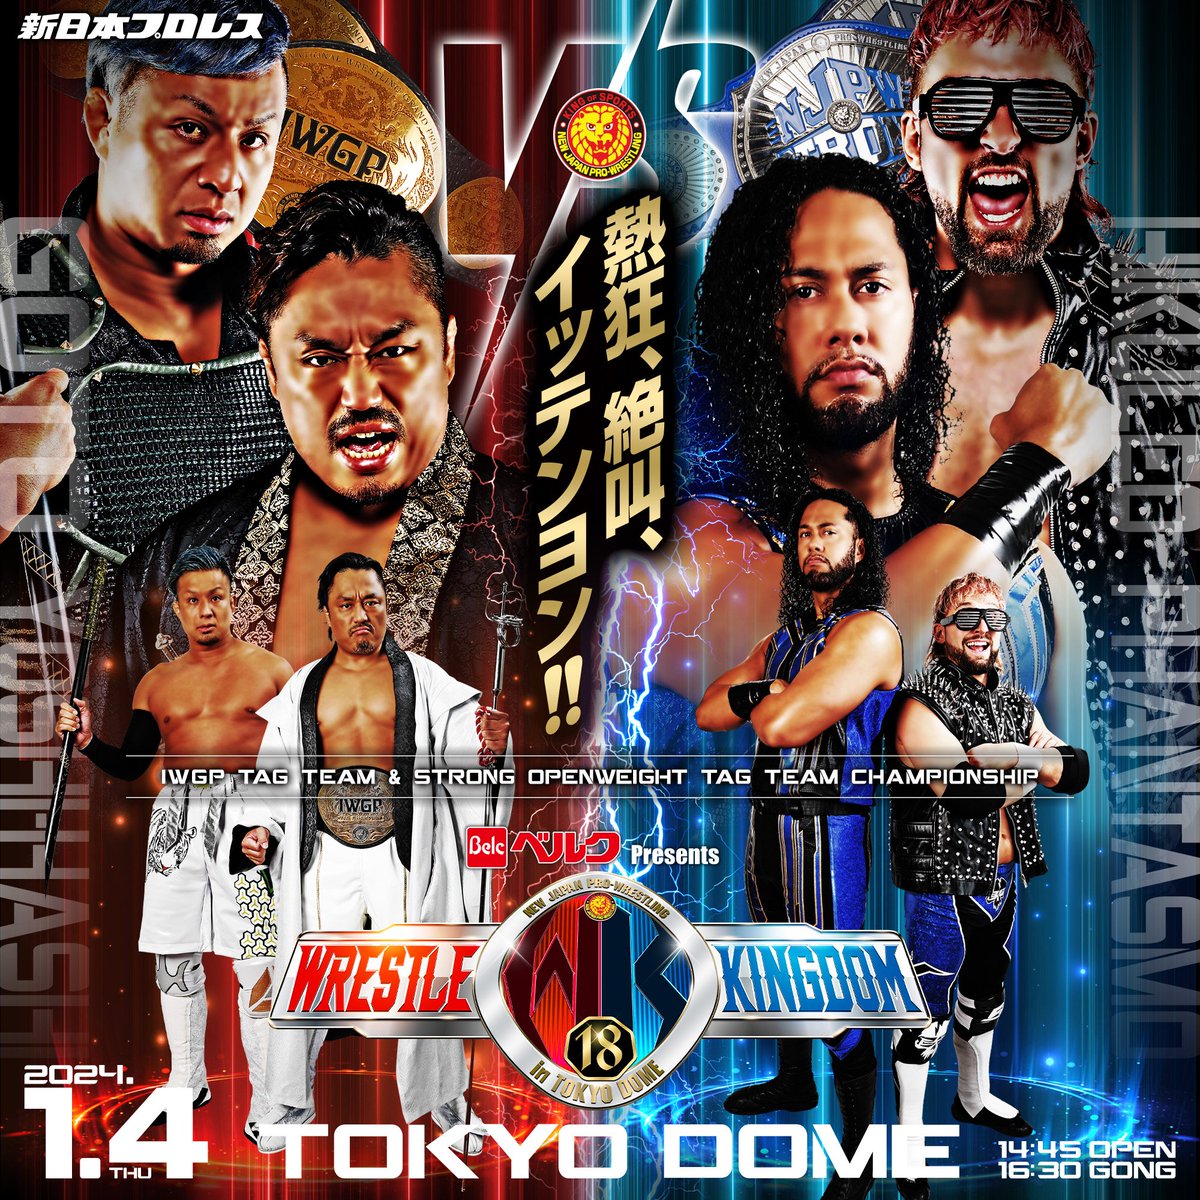 JANUARY 4 A rubber match for all the gold! IWGP Tag Champions Bishamon vs #njpwSTRONG Tag Champions GoD, winner take all! Tickets available worldwide! l-tike.com/st1/njpwos/sit… #njpw #njwk18